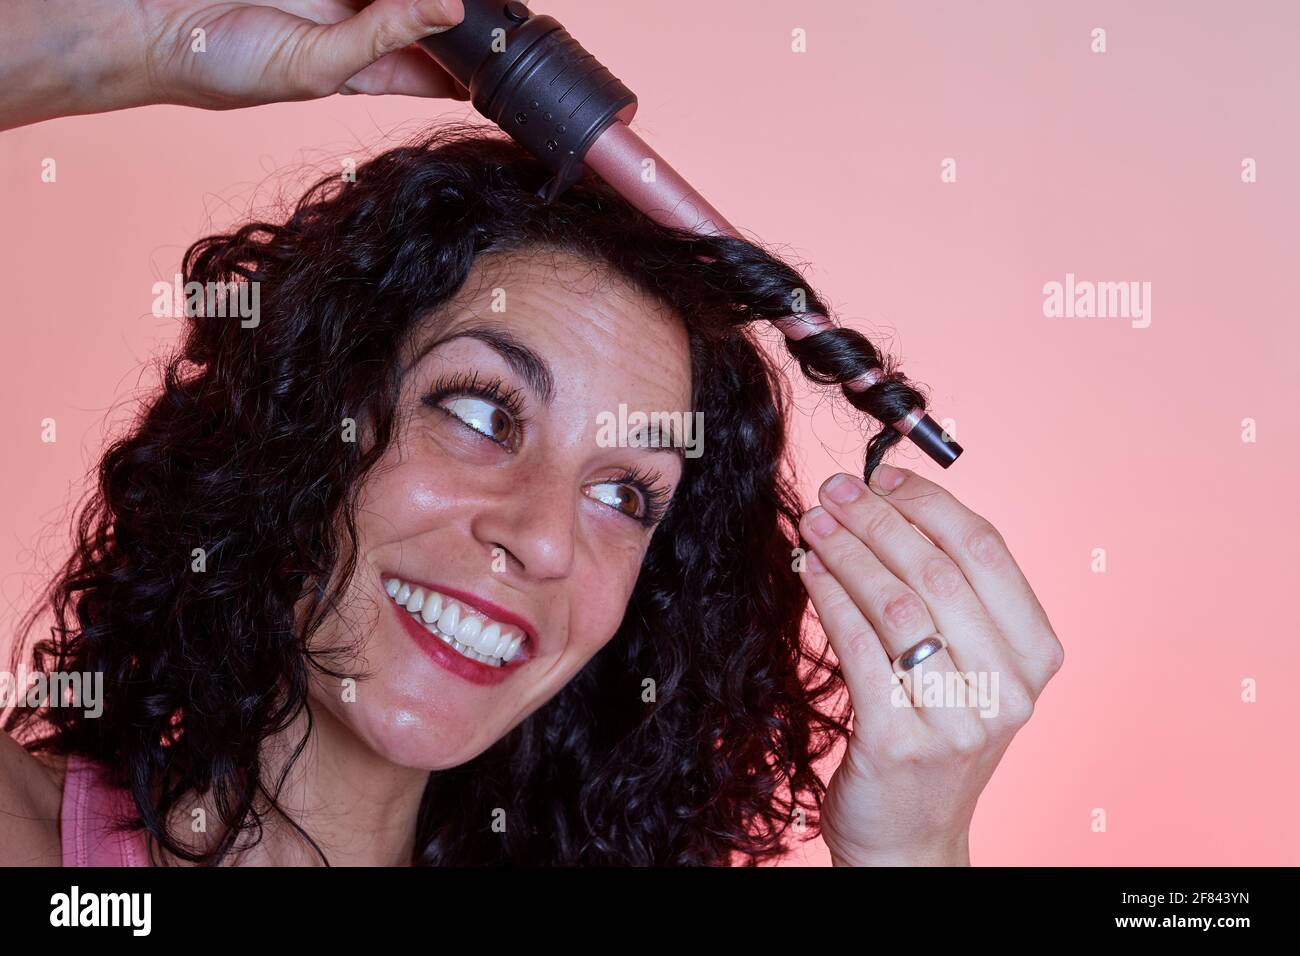 Young smiling woman with black curly hair uses tweezers or curling iron to get curls and waves in her hair. care and beauty concept. copy space. Stock Photo